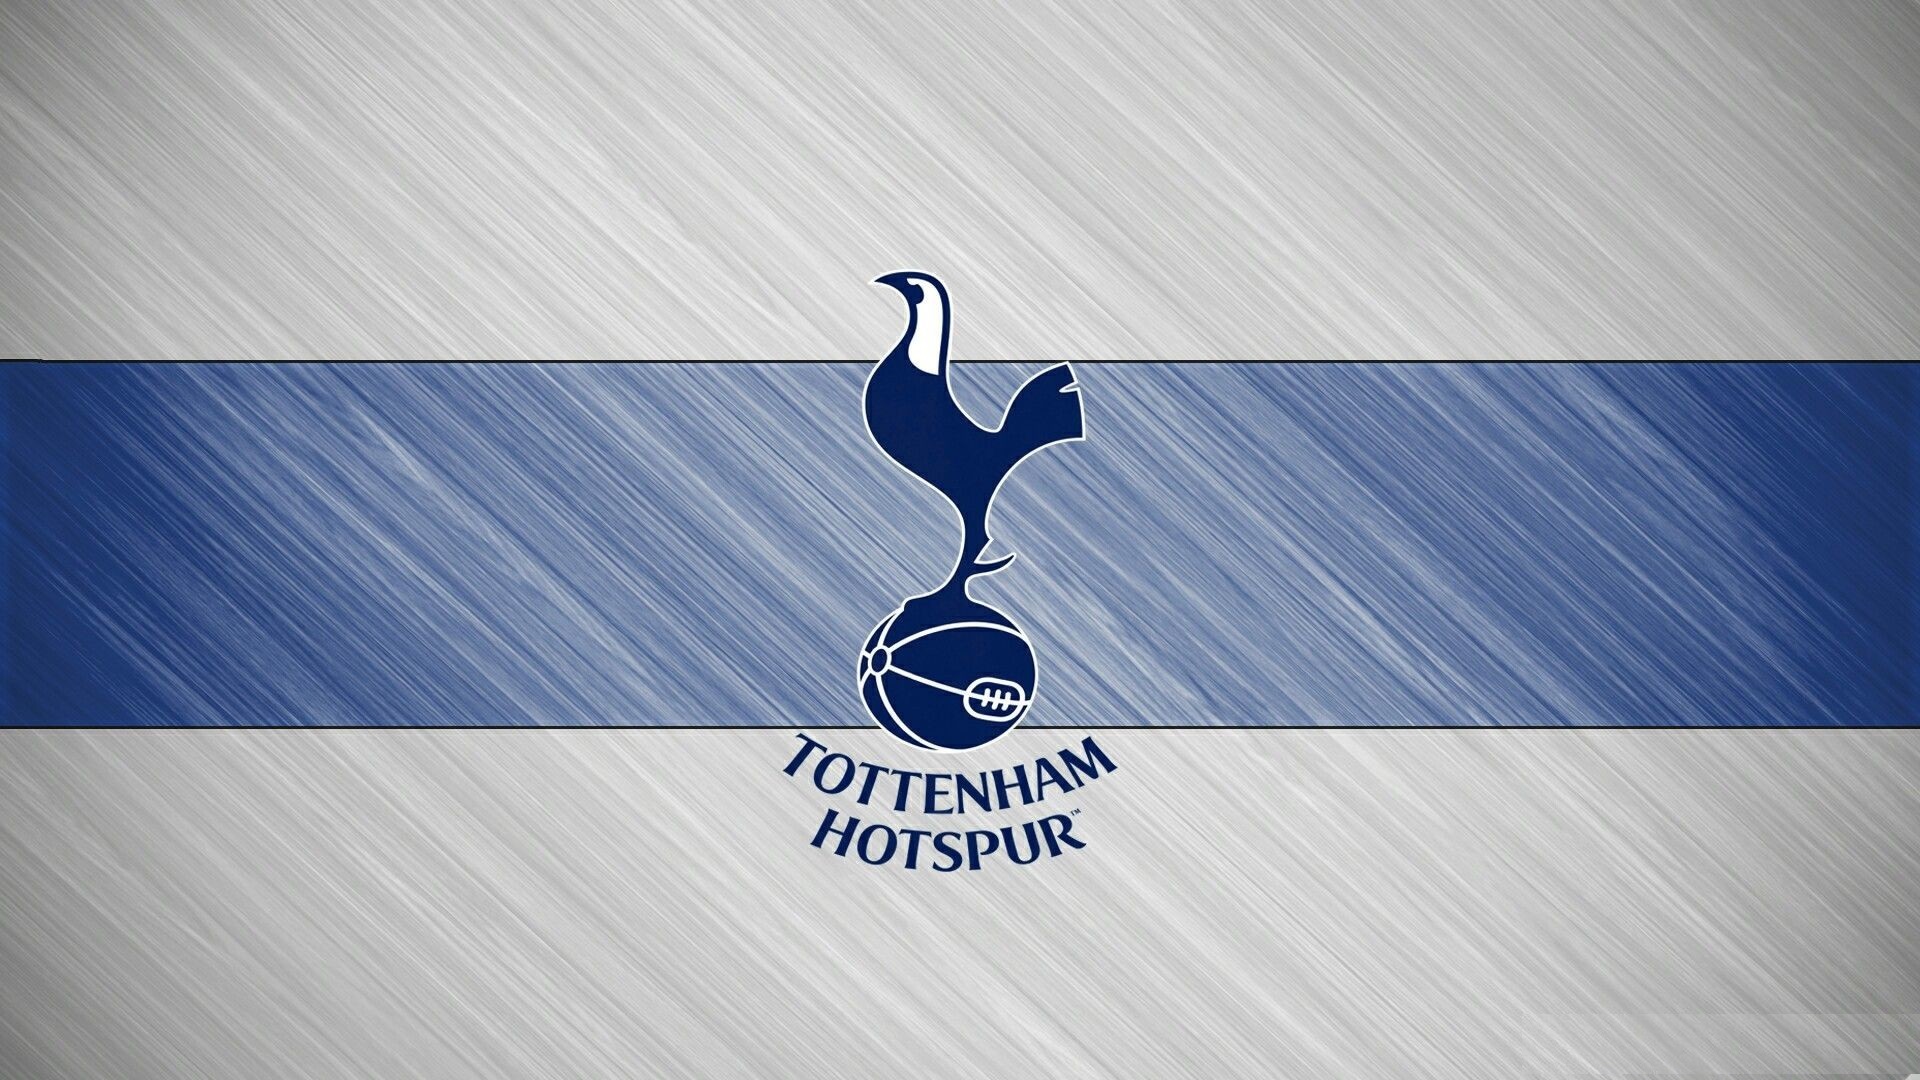 Tottenham Hotspur Wallpaper HD with high-resolution 1920x1080 pixel. You can use this wallpaper for your Desktop Computer Backgrounds, Mac Wallpapers, Android Lock screen or iPhone Screensavers and another smartphone device